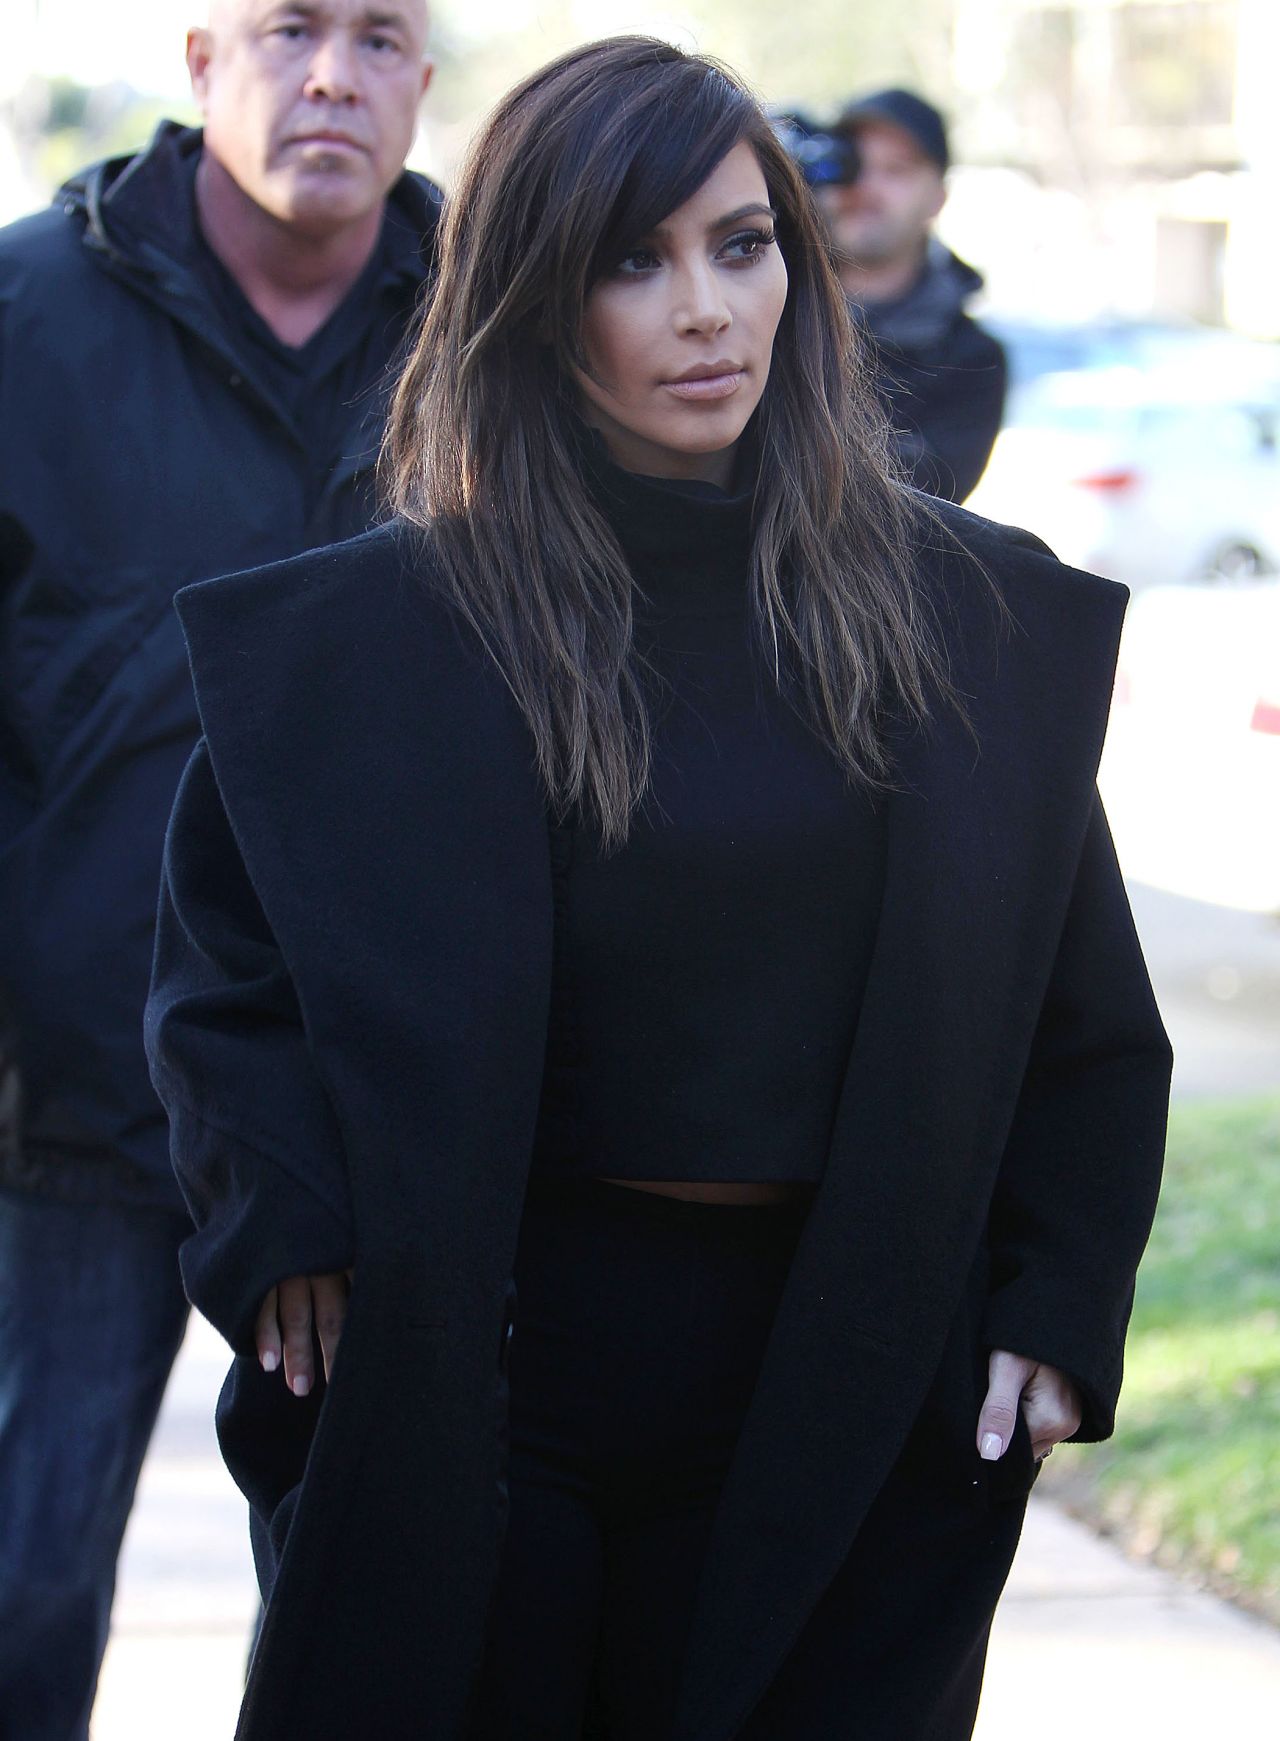 Kim Kardashian Lunch With Mom Kris Jenner At Fins Seafood Grill Westlake Village February